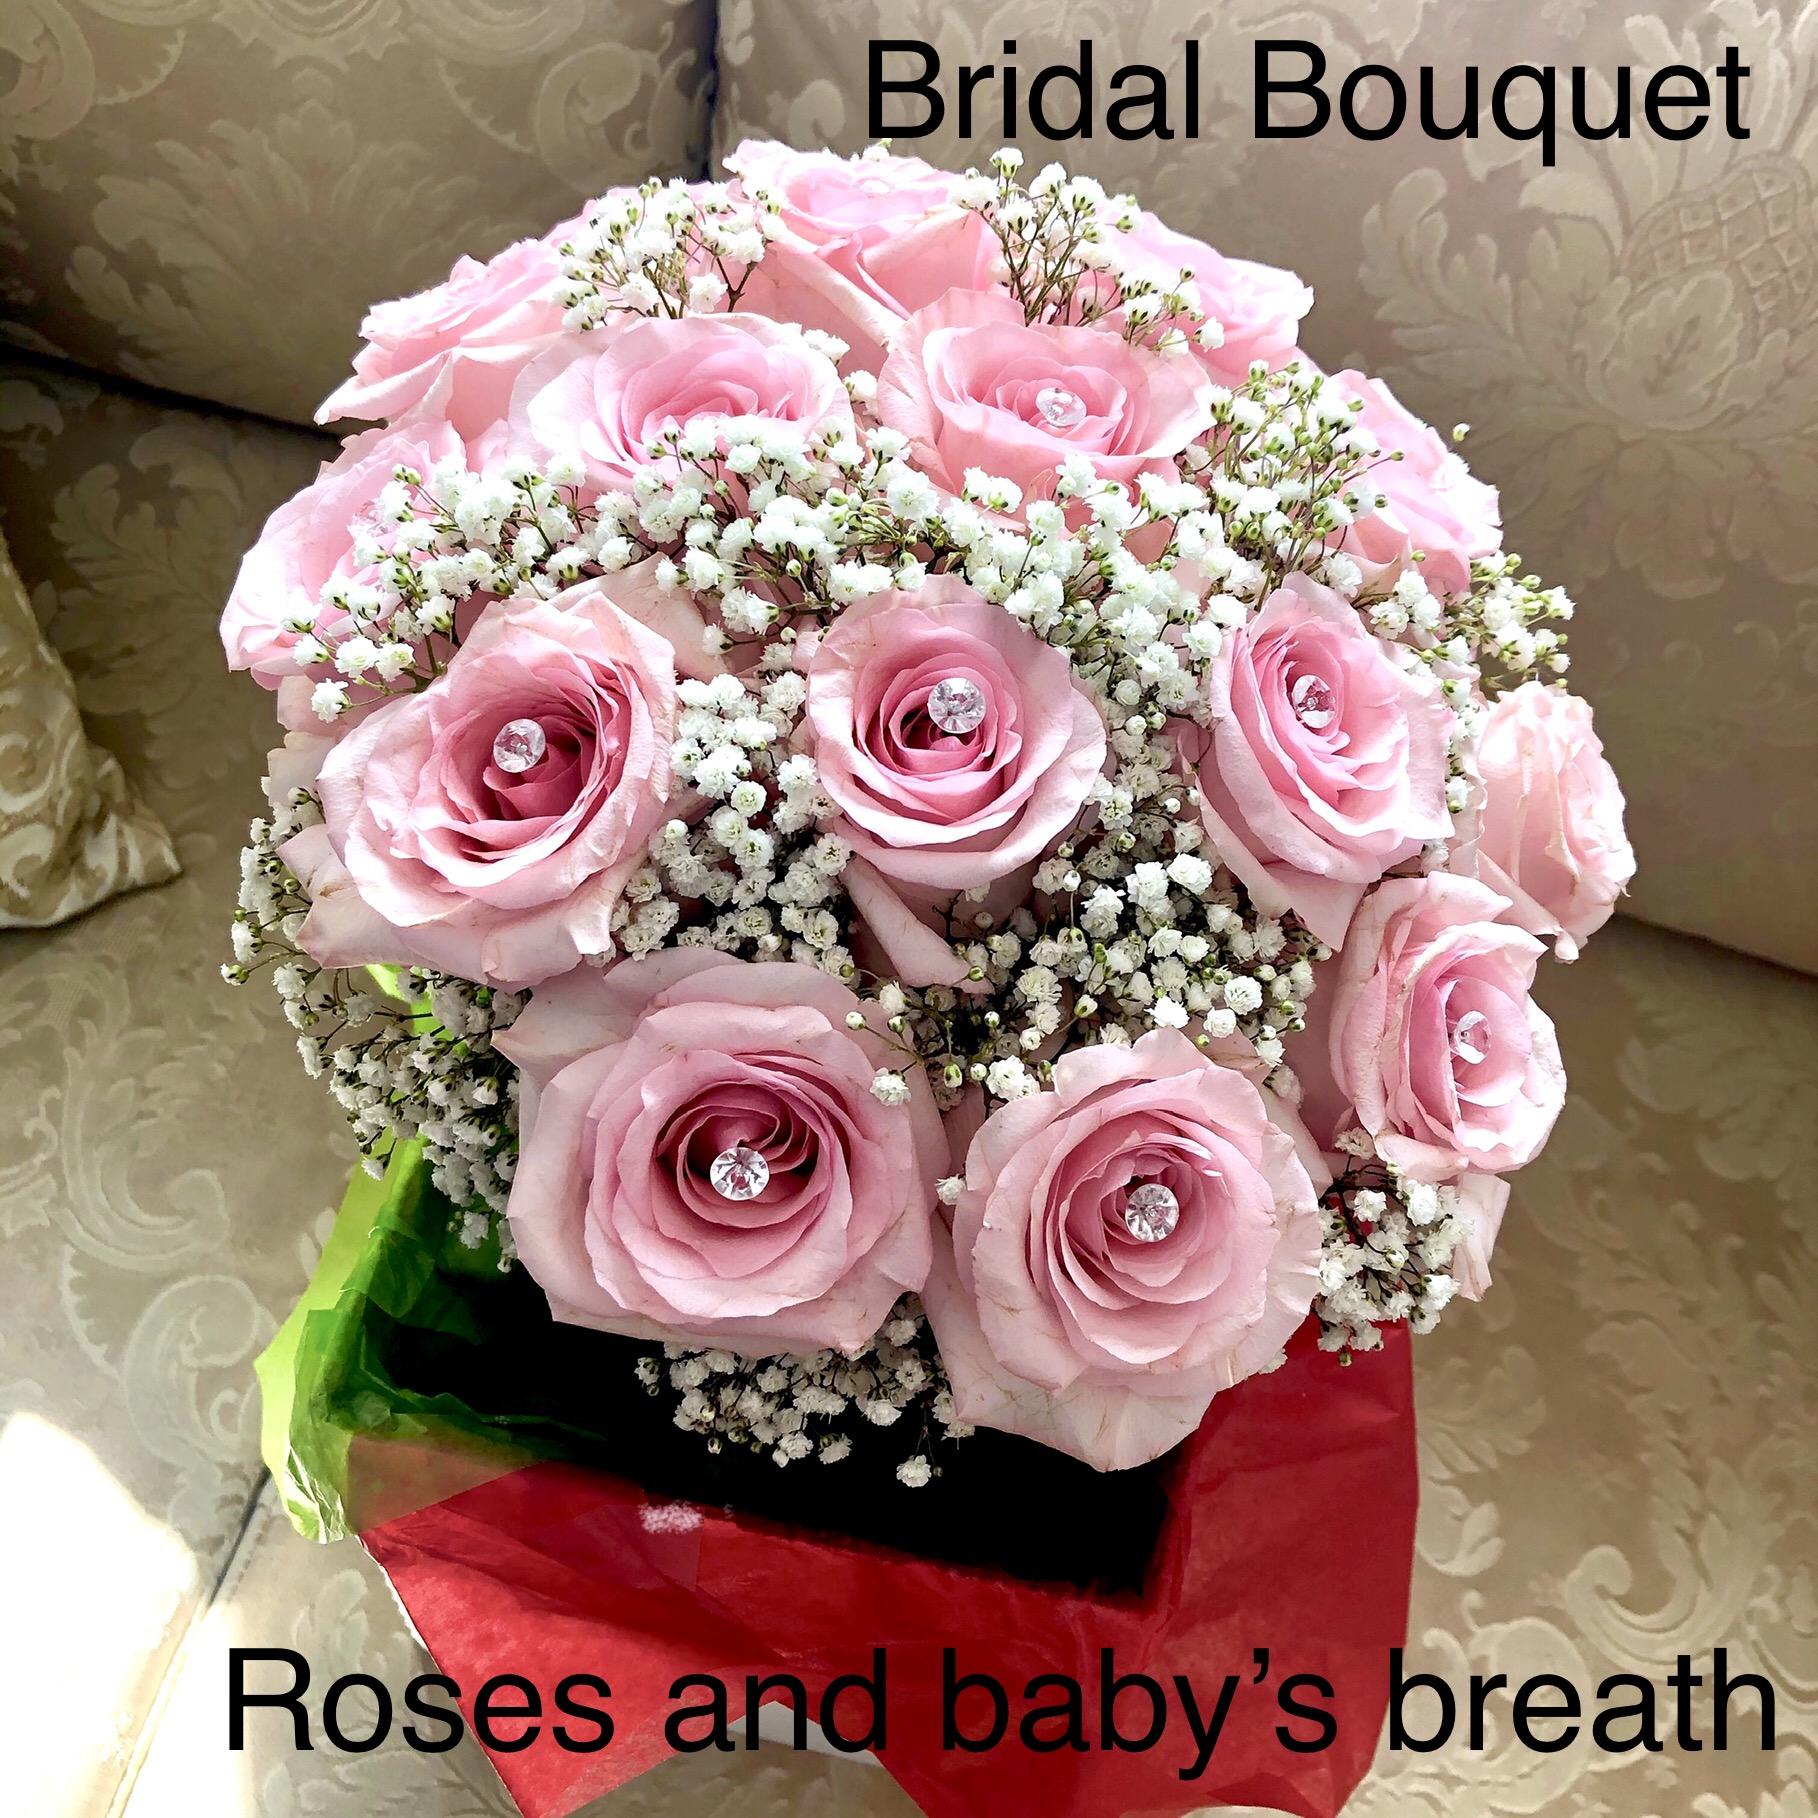 $125  Bridal Bouquet Roses and Babies Breath                                                                     